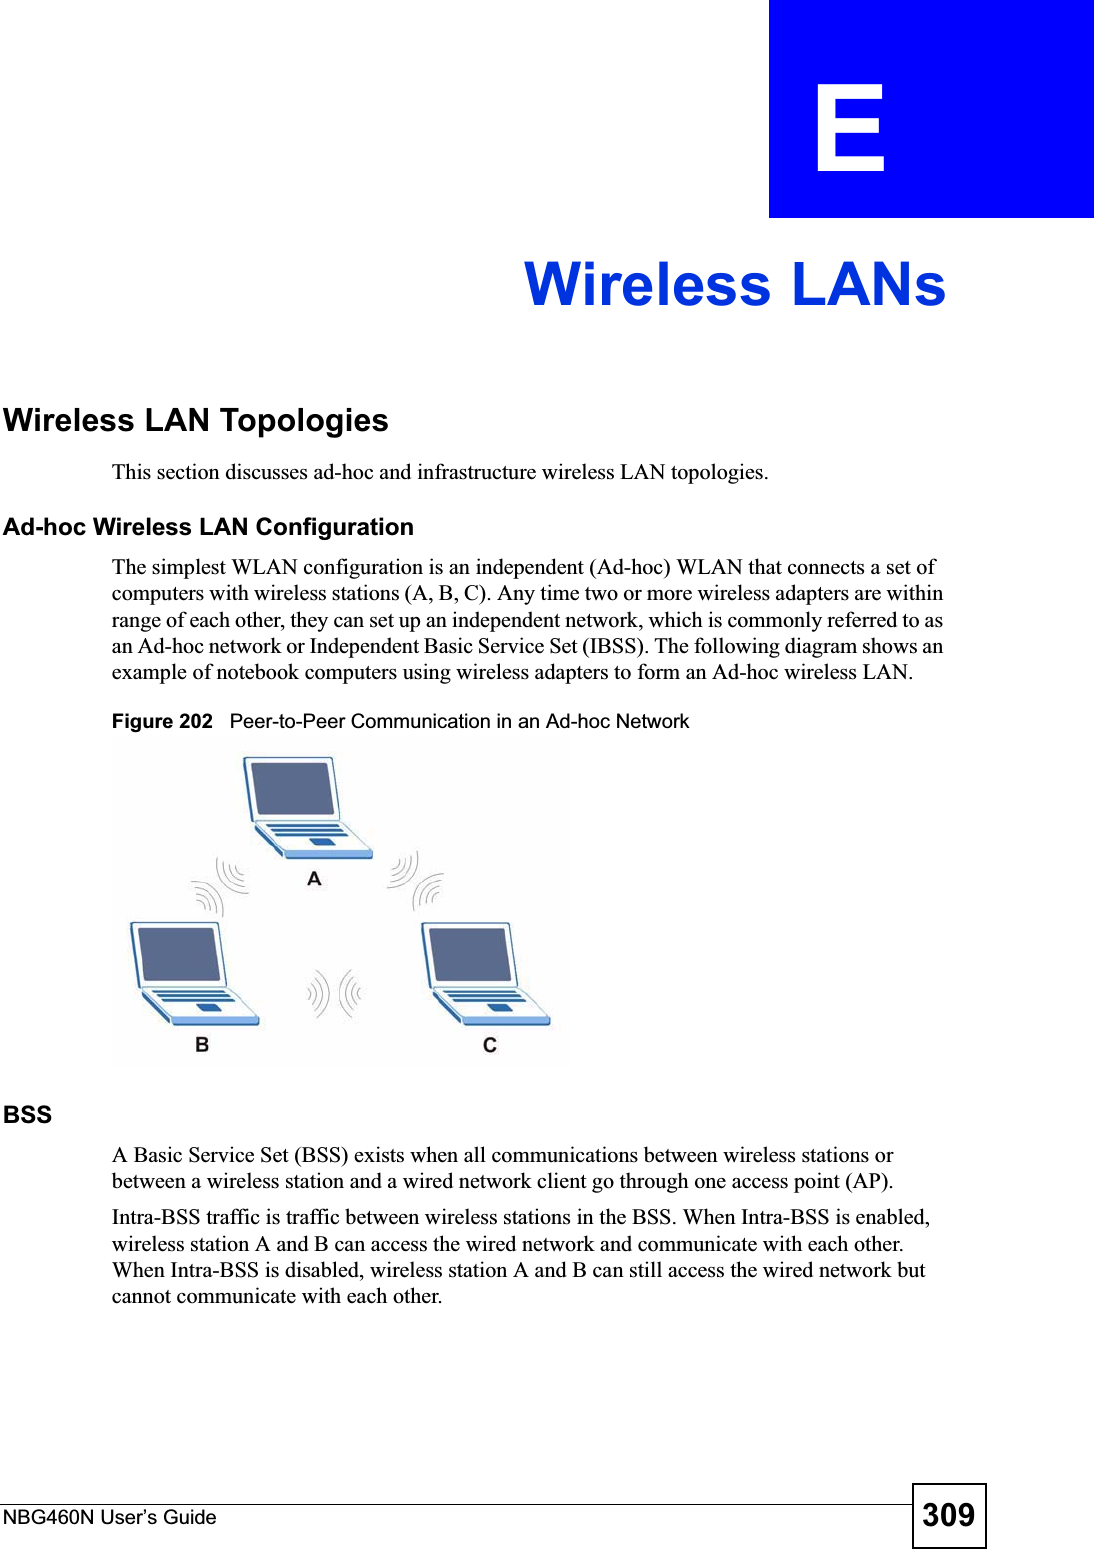 NBG460N User’s Guide 309APPENDIX  E Wireless LANsWireless LAN TopologiesThis section discusses ad-hoc and infrastructure wireless LAN topologies.Ad-hoc Wireless LAN ConfigurationThe simplest WLAN configuration is an independent (Ad-hoc) WLAN that connects a set of computers with wireless stations (A, B, C). Any time two or more wireless adapters are within range of each other, they can set up an independent network, which is commonly referred to as an Ad-hoc network or Independent Basic Service Set (IBSS). The following diagram shows an example of notebook computers using wireless adapters to form an Ad-hoc wireless LAN. Figure 202   Peer-to-Peer Communication in an Ad-hoc NetworkBSSA Basic Service Set (BSS) exists when all communications between wireless stations or between a wireless station and a wired network client go through one access point (AP). Intra-BSS traffic is traffic between wireless stations in the BSS. When Intra-BSS is enabled, wireless station A and B can access the wired network and communicate with each other. When Intra-BSS is disabled, wireless station A and B can still access the wired network but cannot communicate with each other.